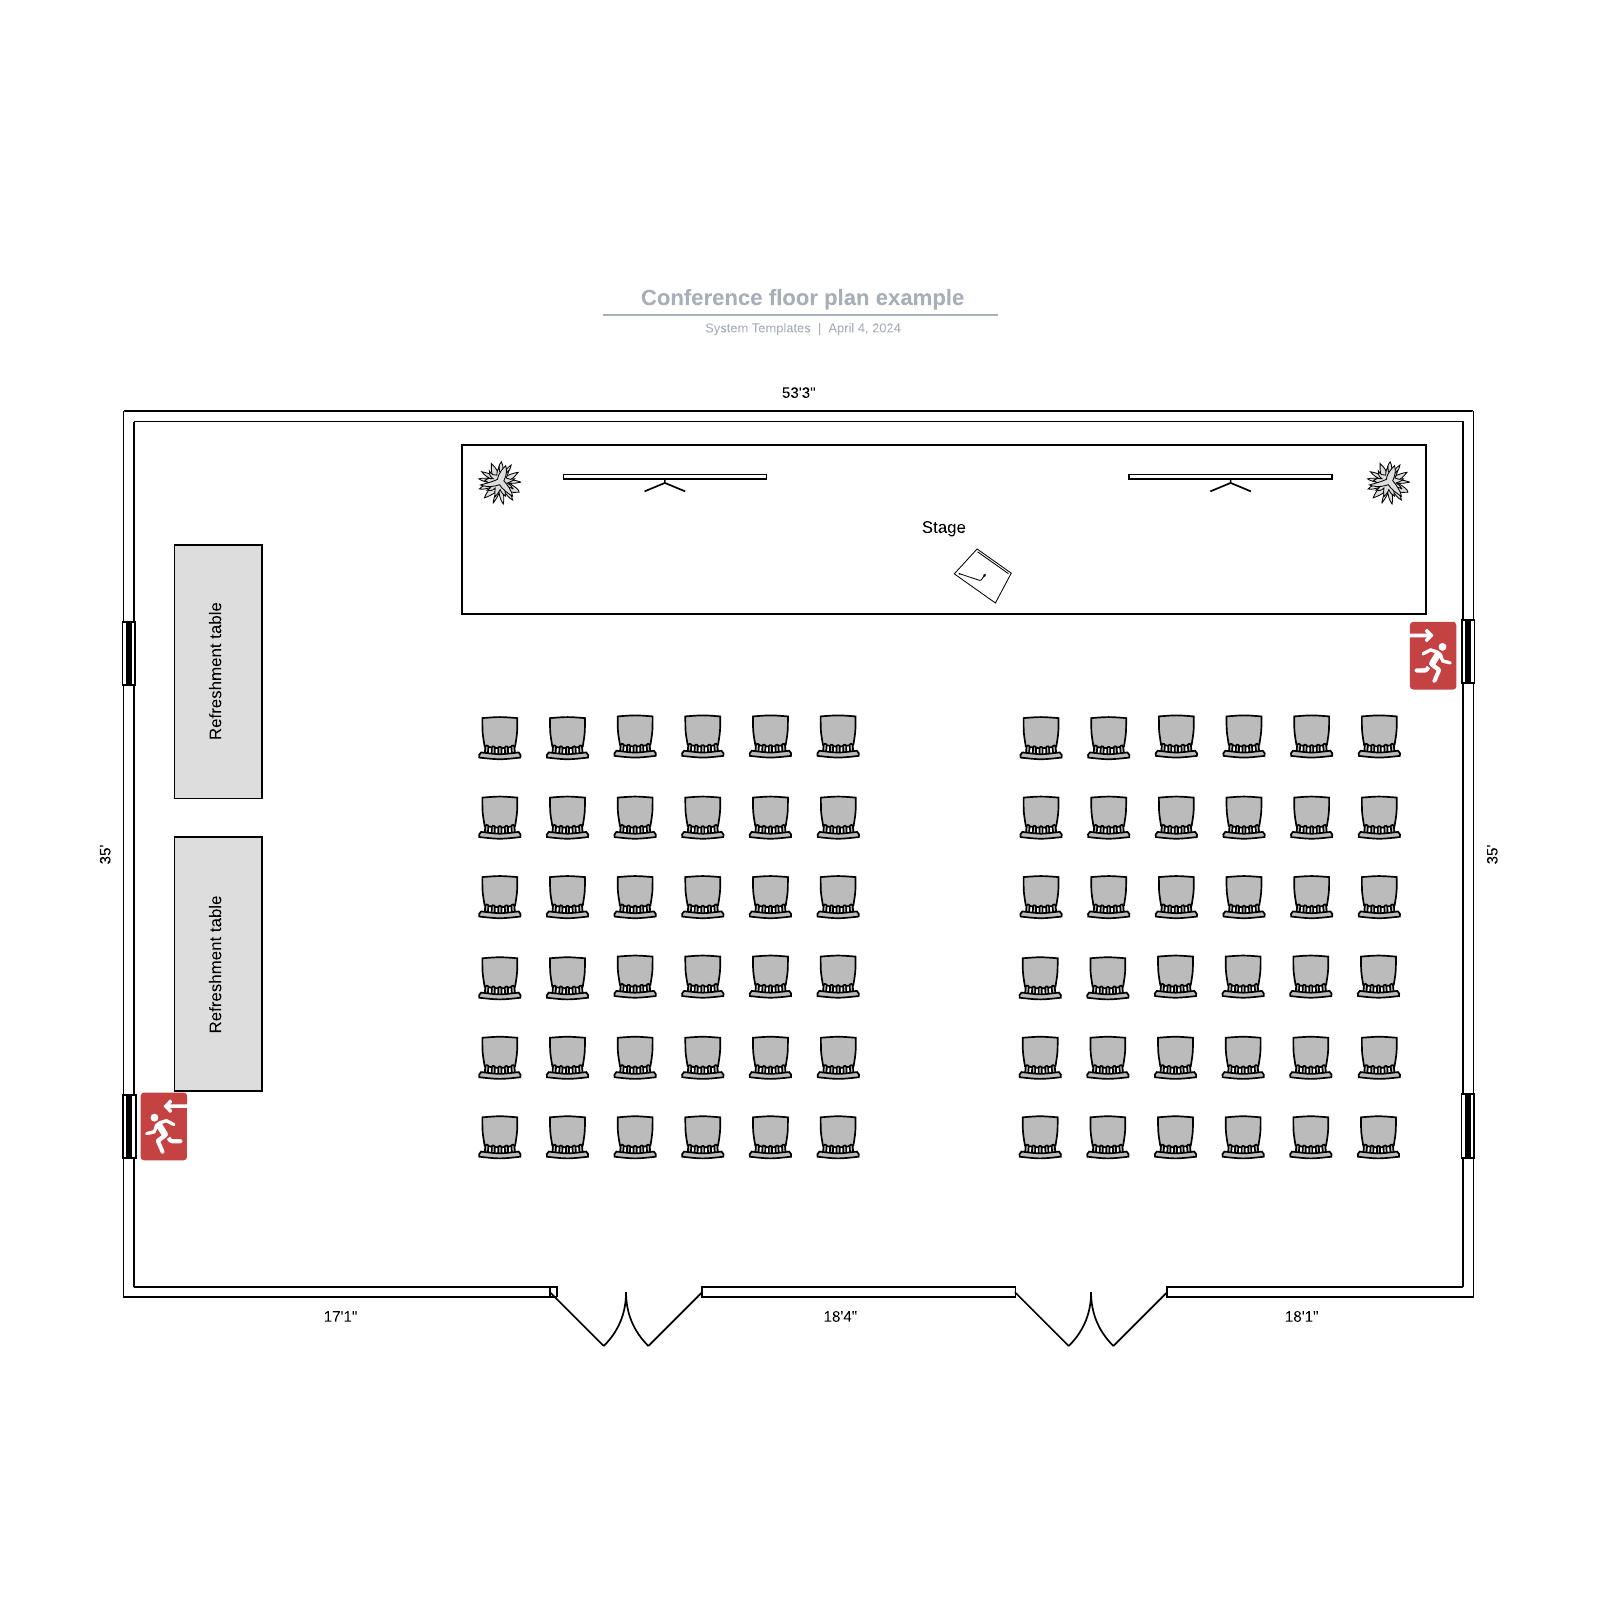 Conference floor plan example example